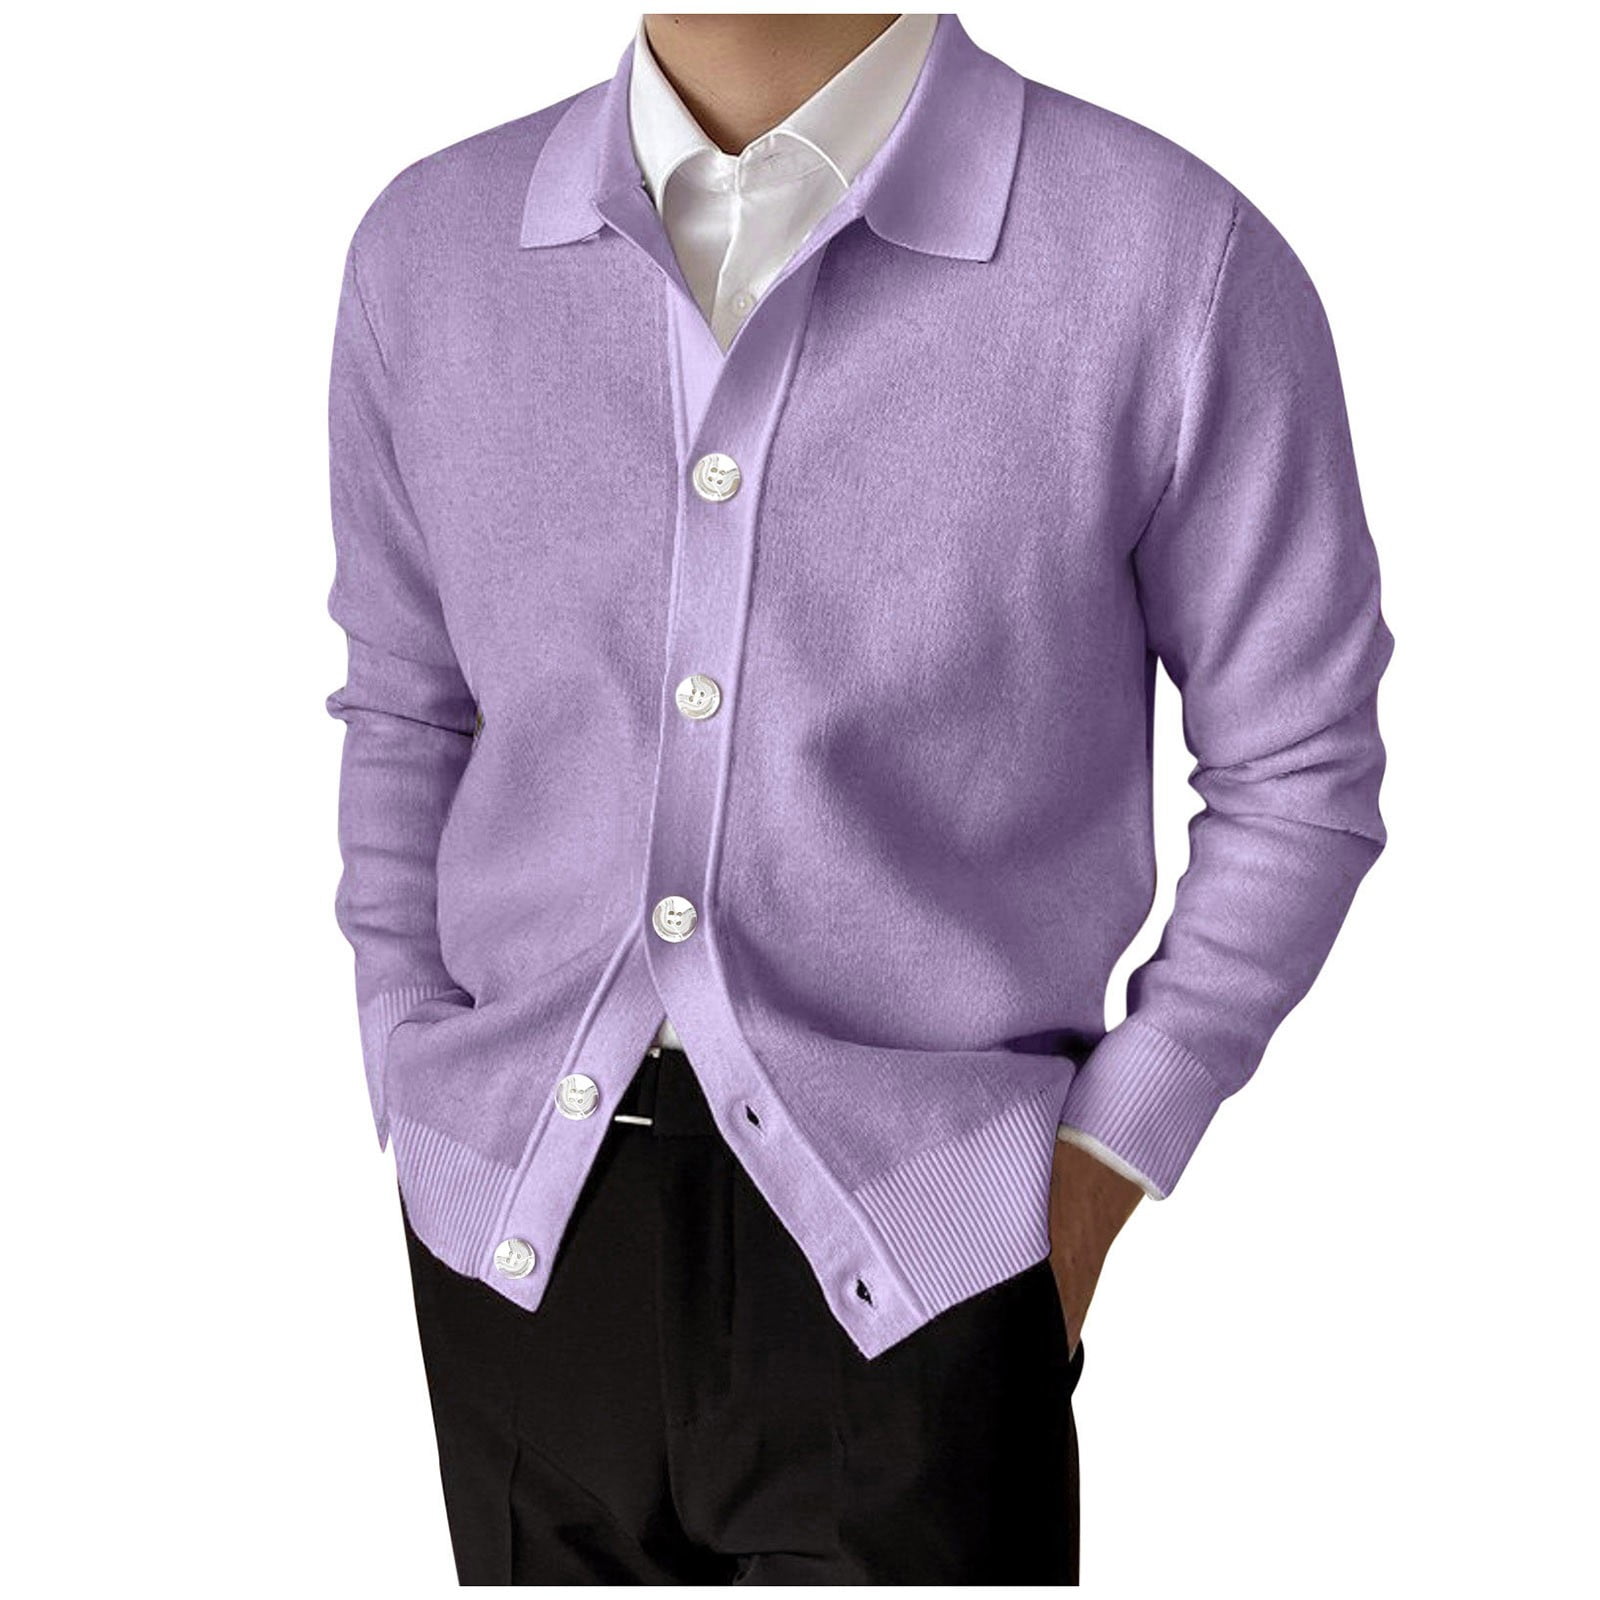 LBECLEY Mens Lightweight Cardigan Sweaters Mens Fashion Casual Knit ...